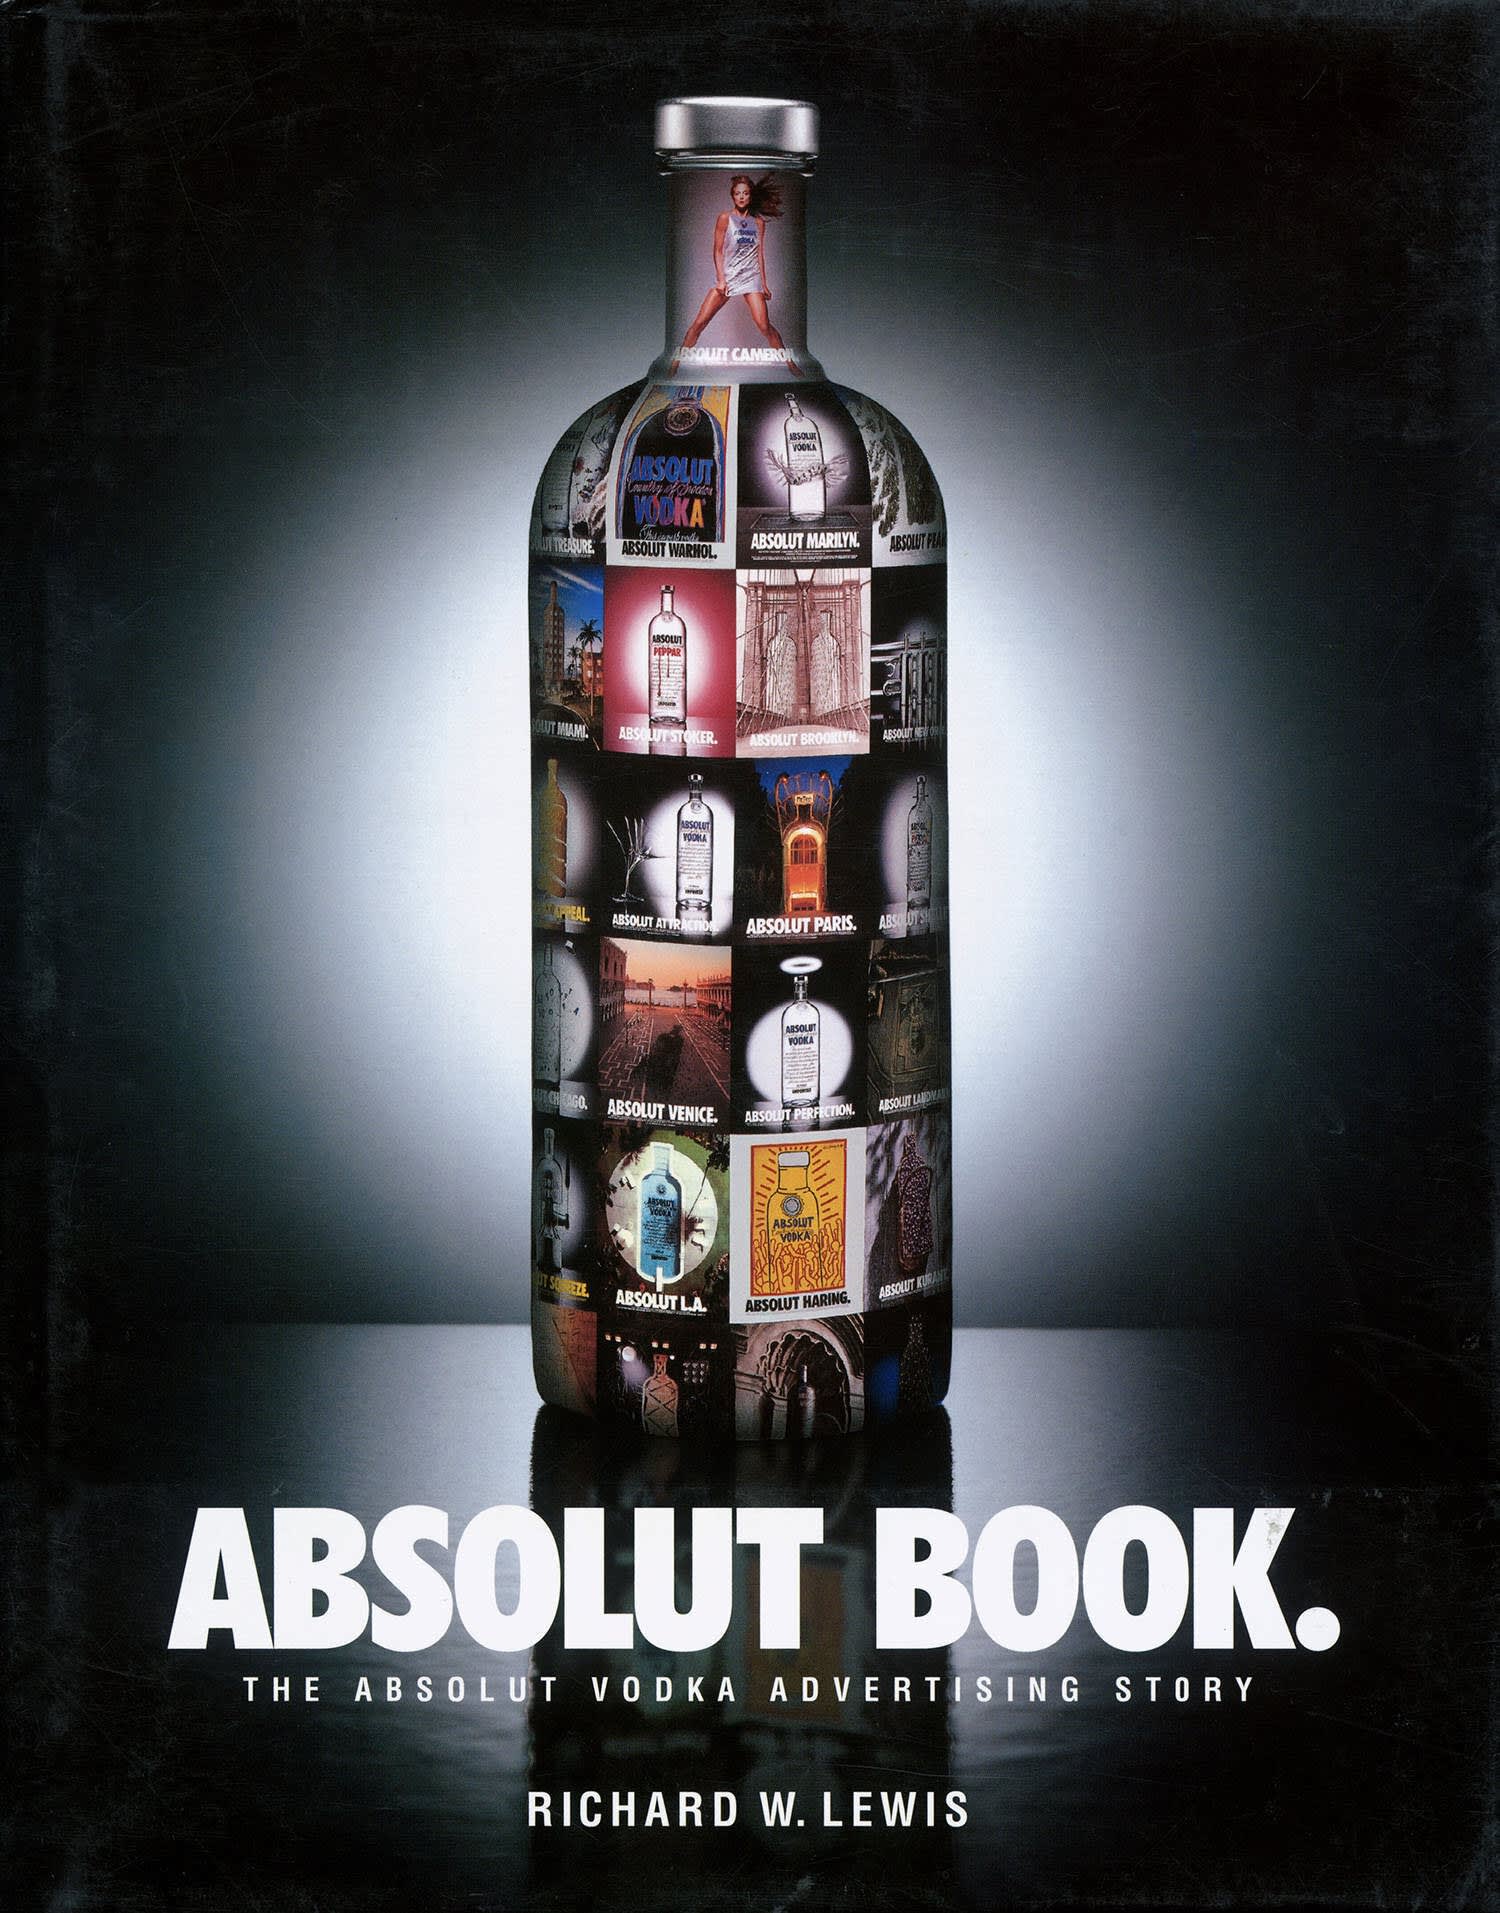 An advertorial image depicting an Absolut Vodka bottle with multiple images on it. 